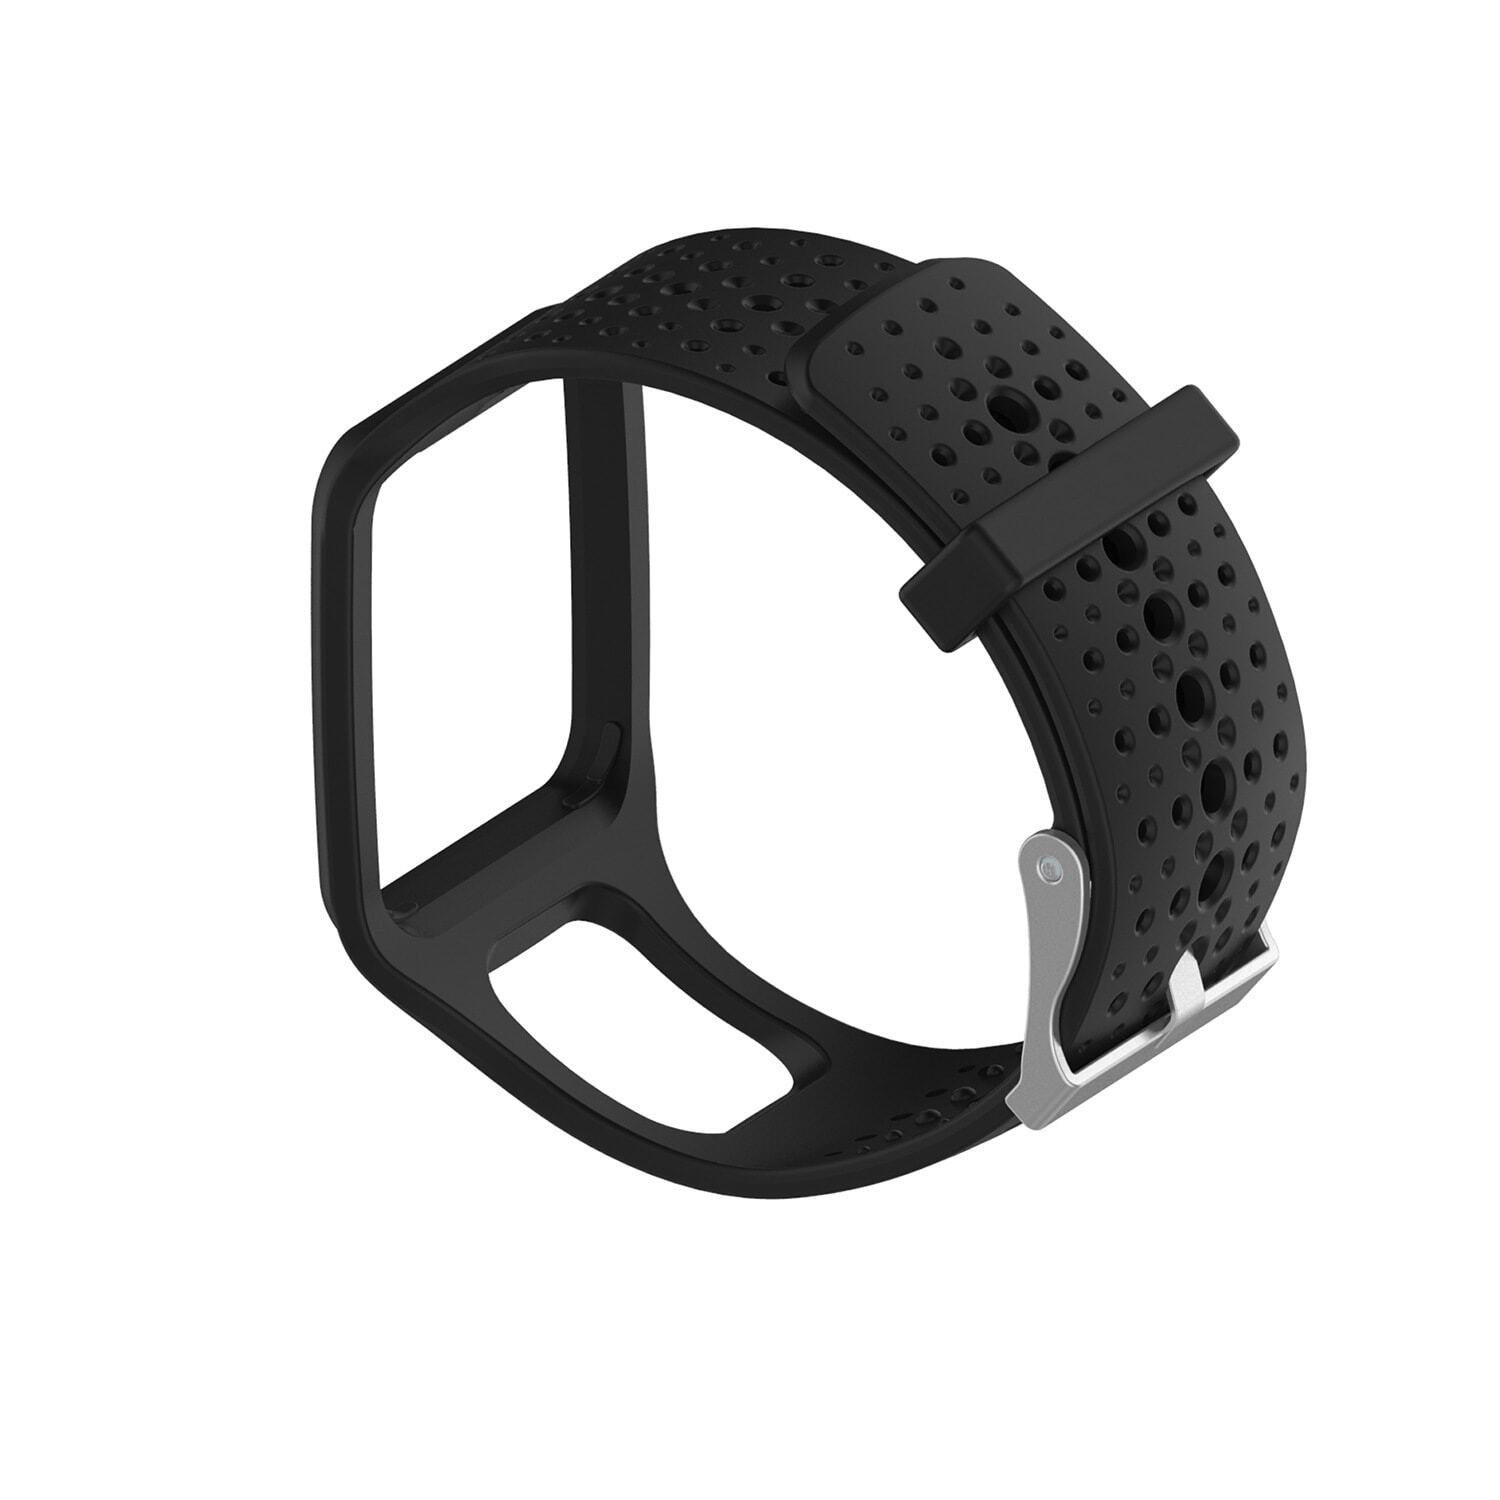 day deo silicon tomtom runner 2 Dây đeo đồng hồ Tomtom strap silicon (dành cho TomTom Runner / Multisports) - YCB.vn